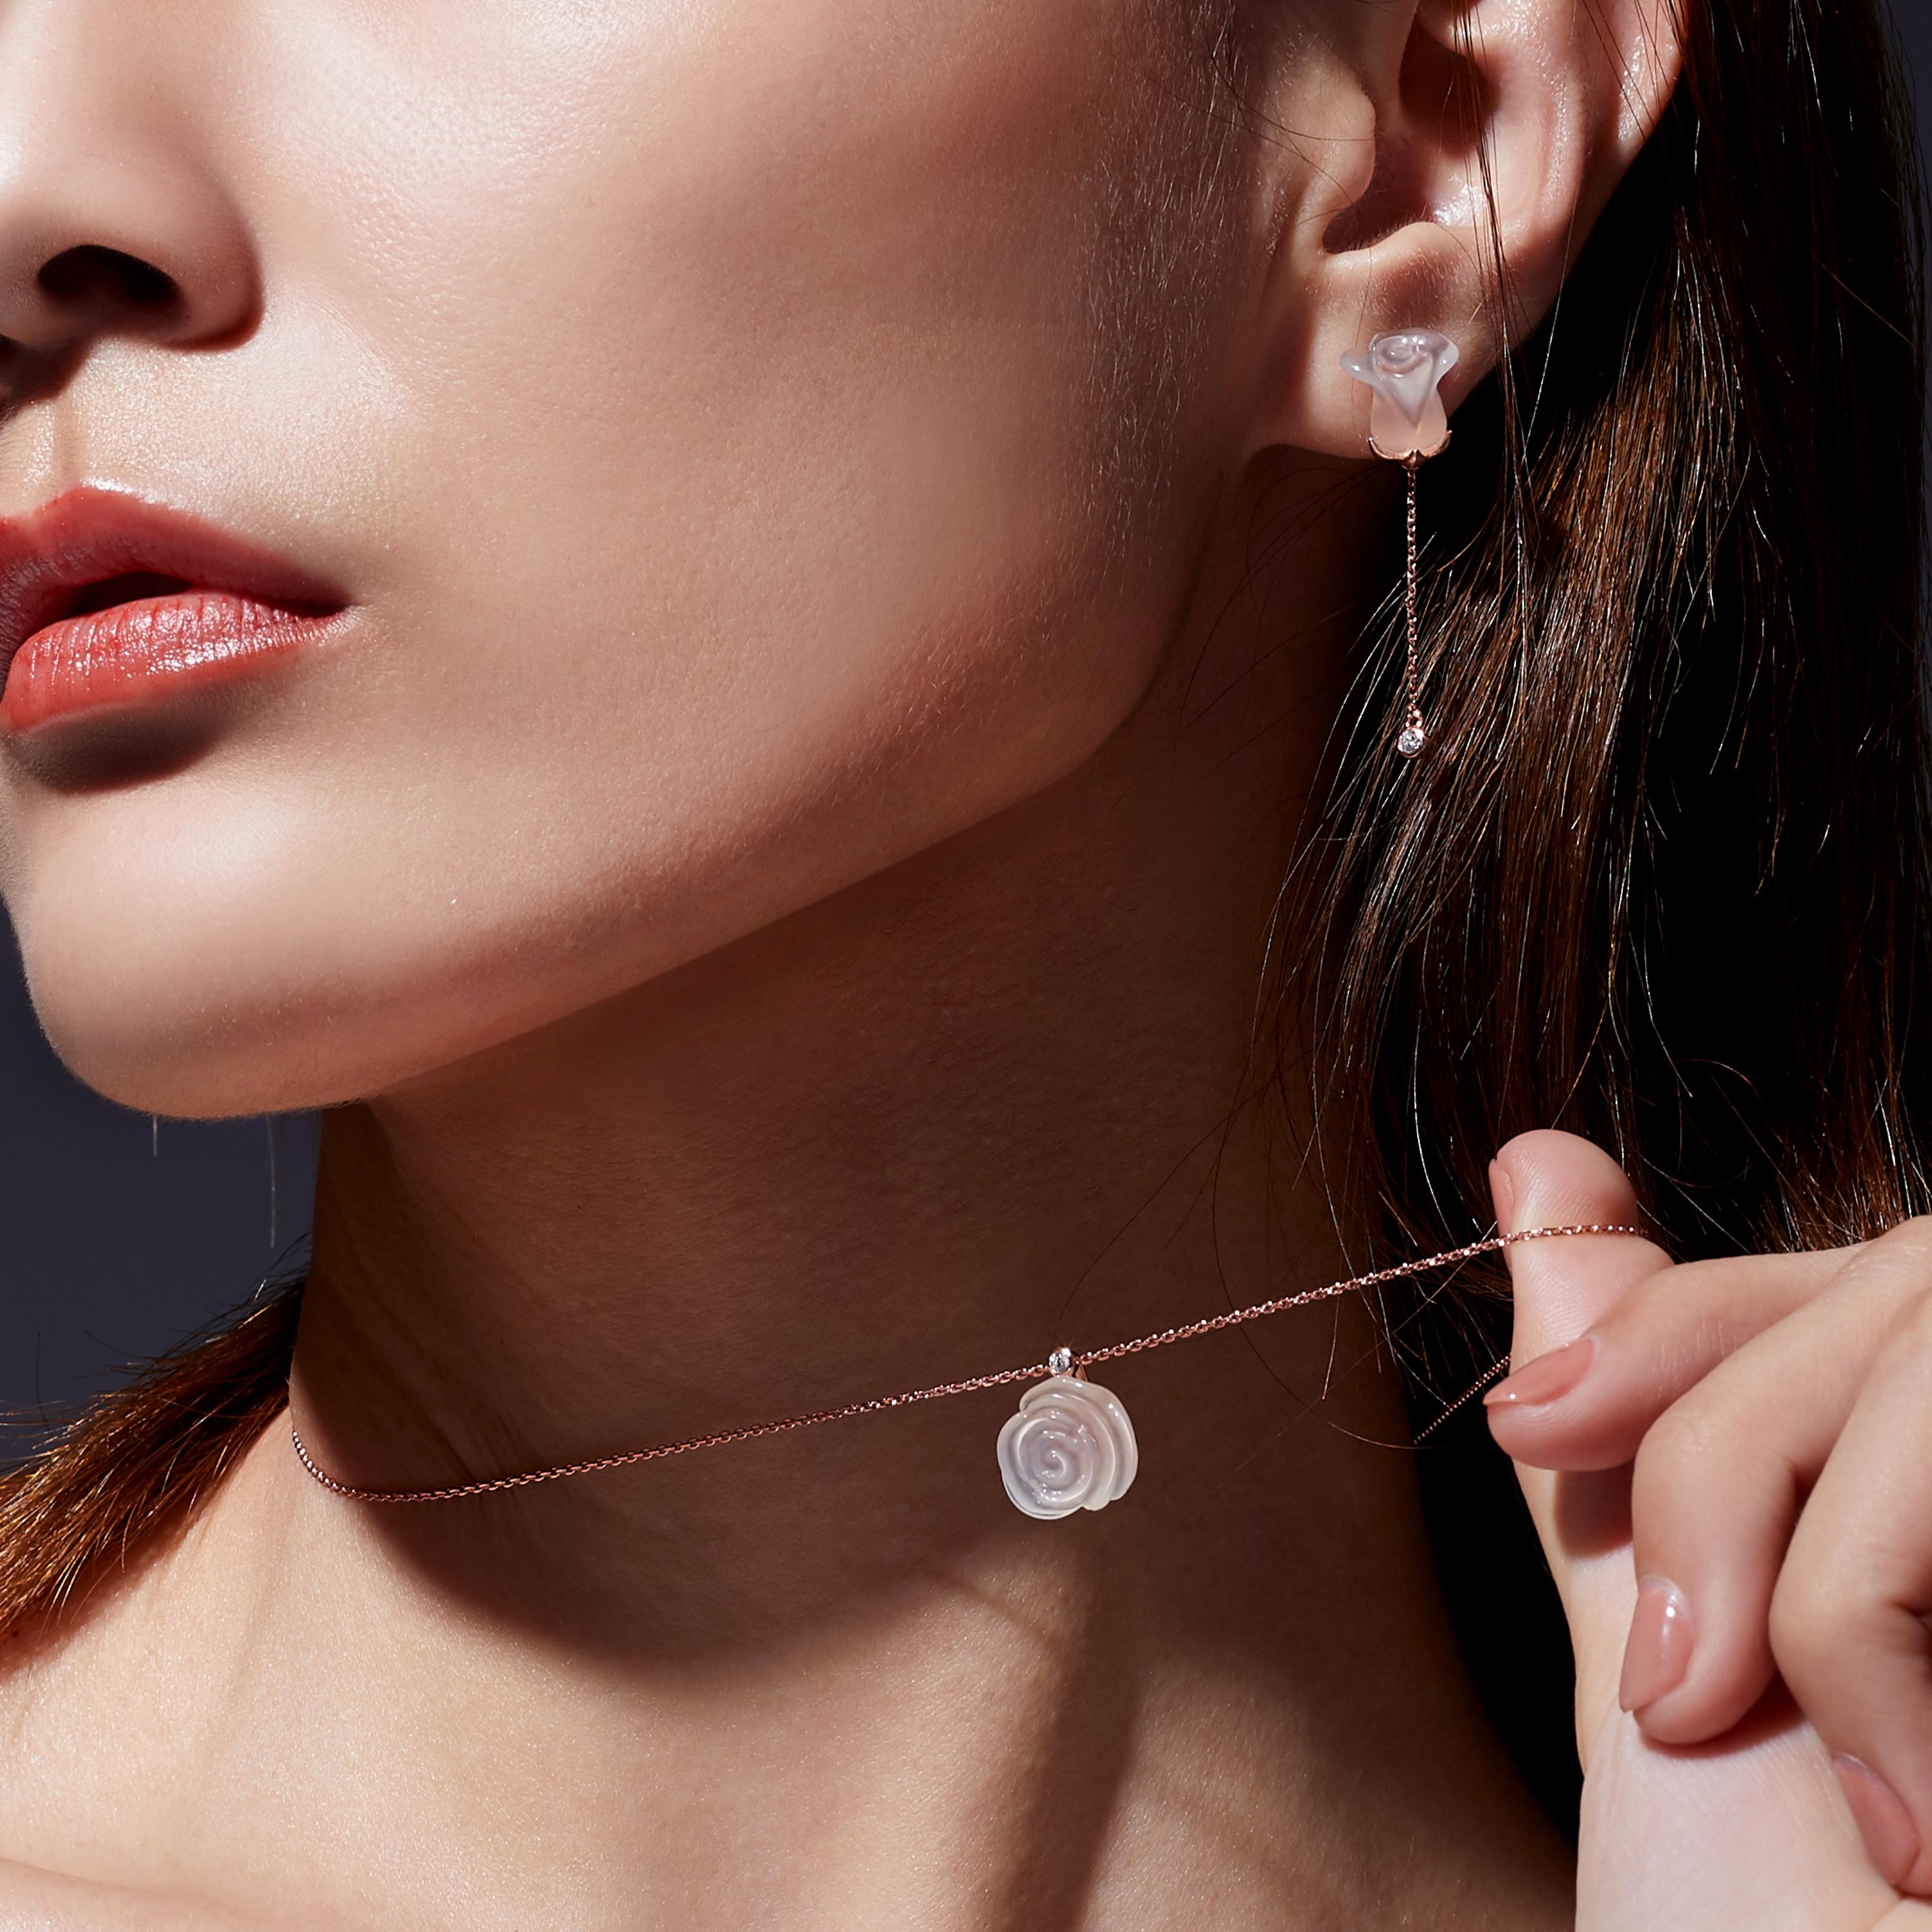 Blossom like the sweet roses with Fei Liu’s Chalcedony Rose Collection. The necklace and earrings set features delicately hand-carved chalcedony rose petals sparkling with the finest cubic zirconia set in 18 karat rose gold plate on sterling